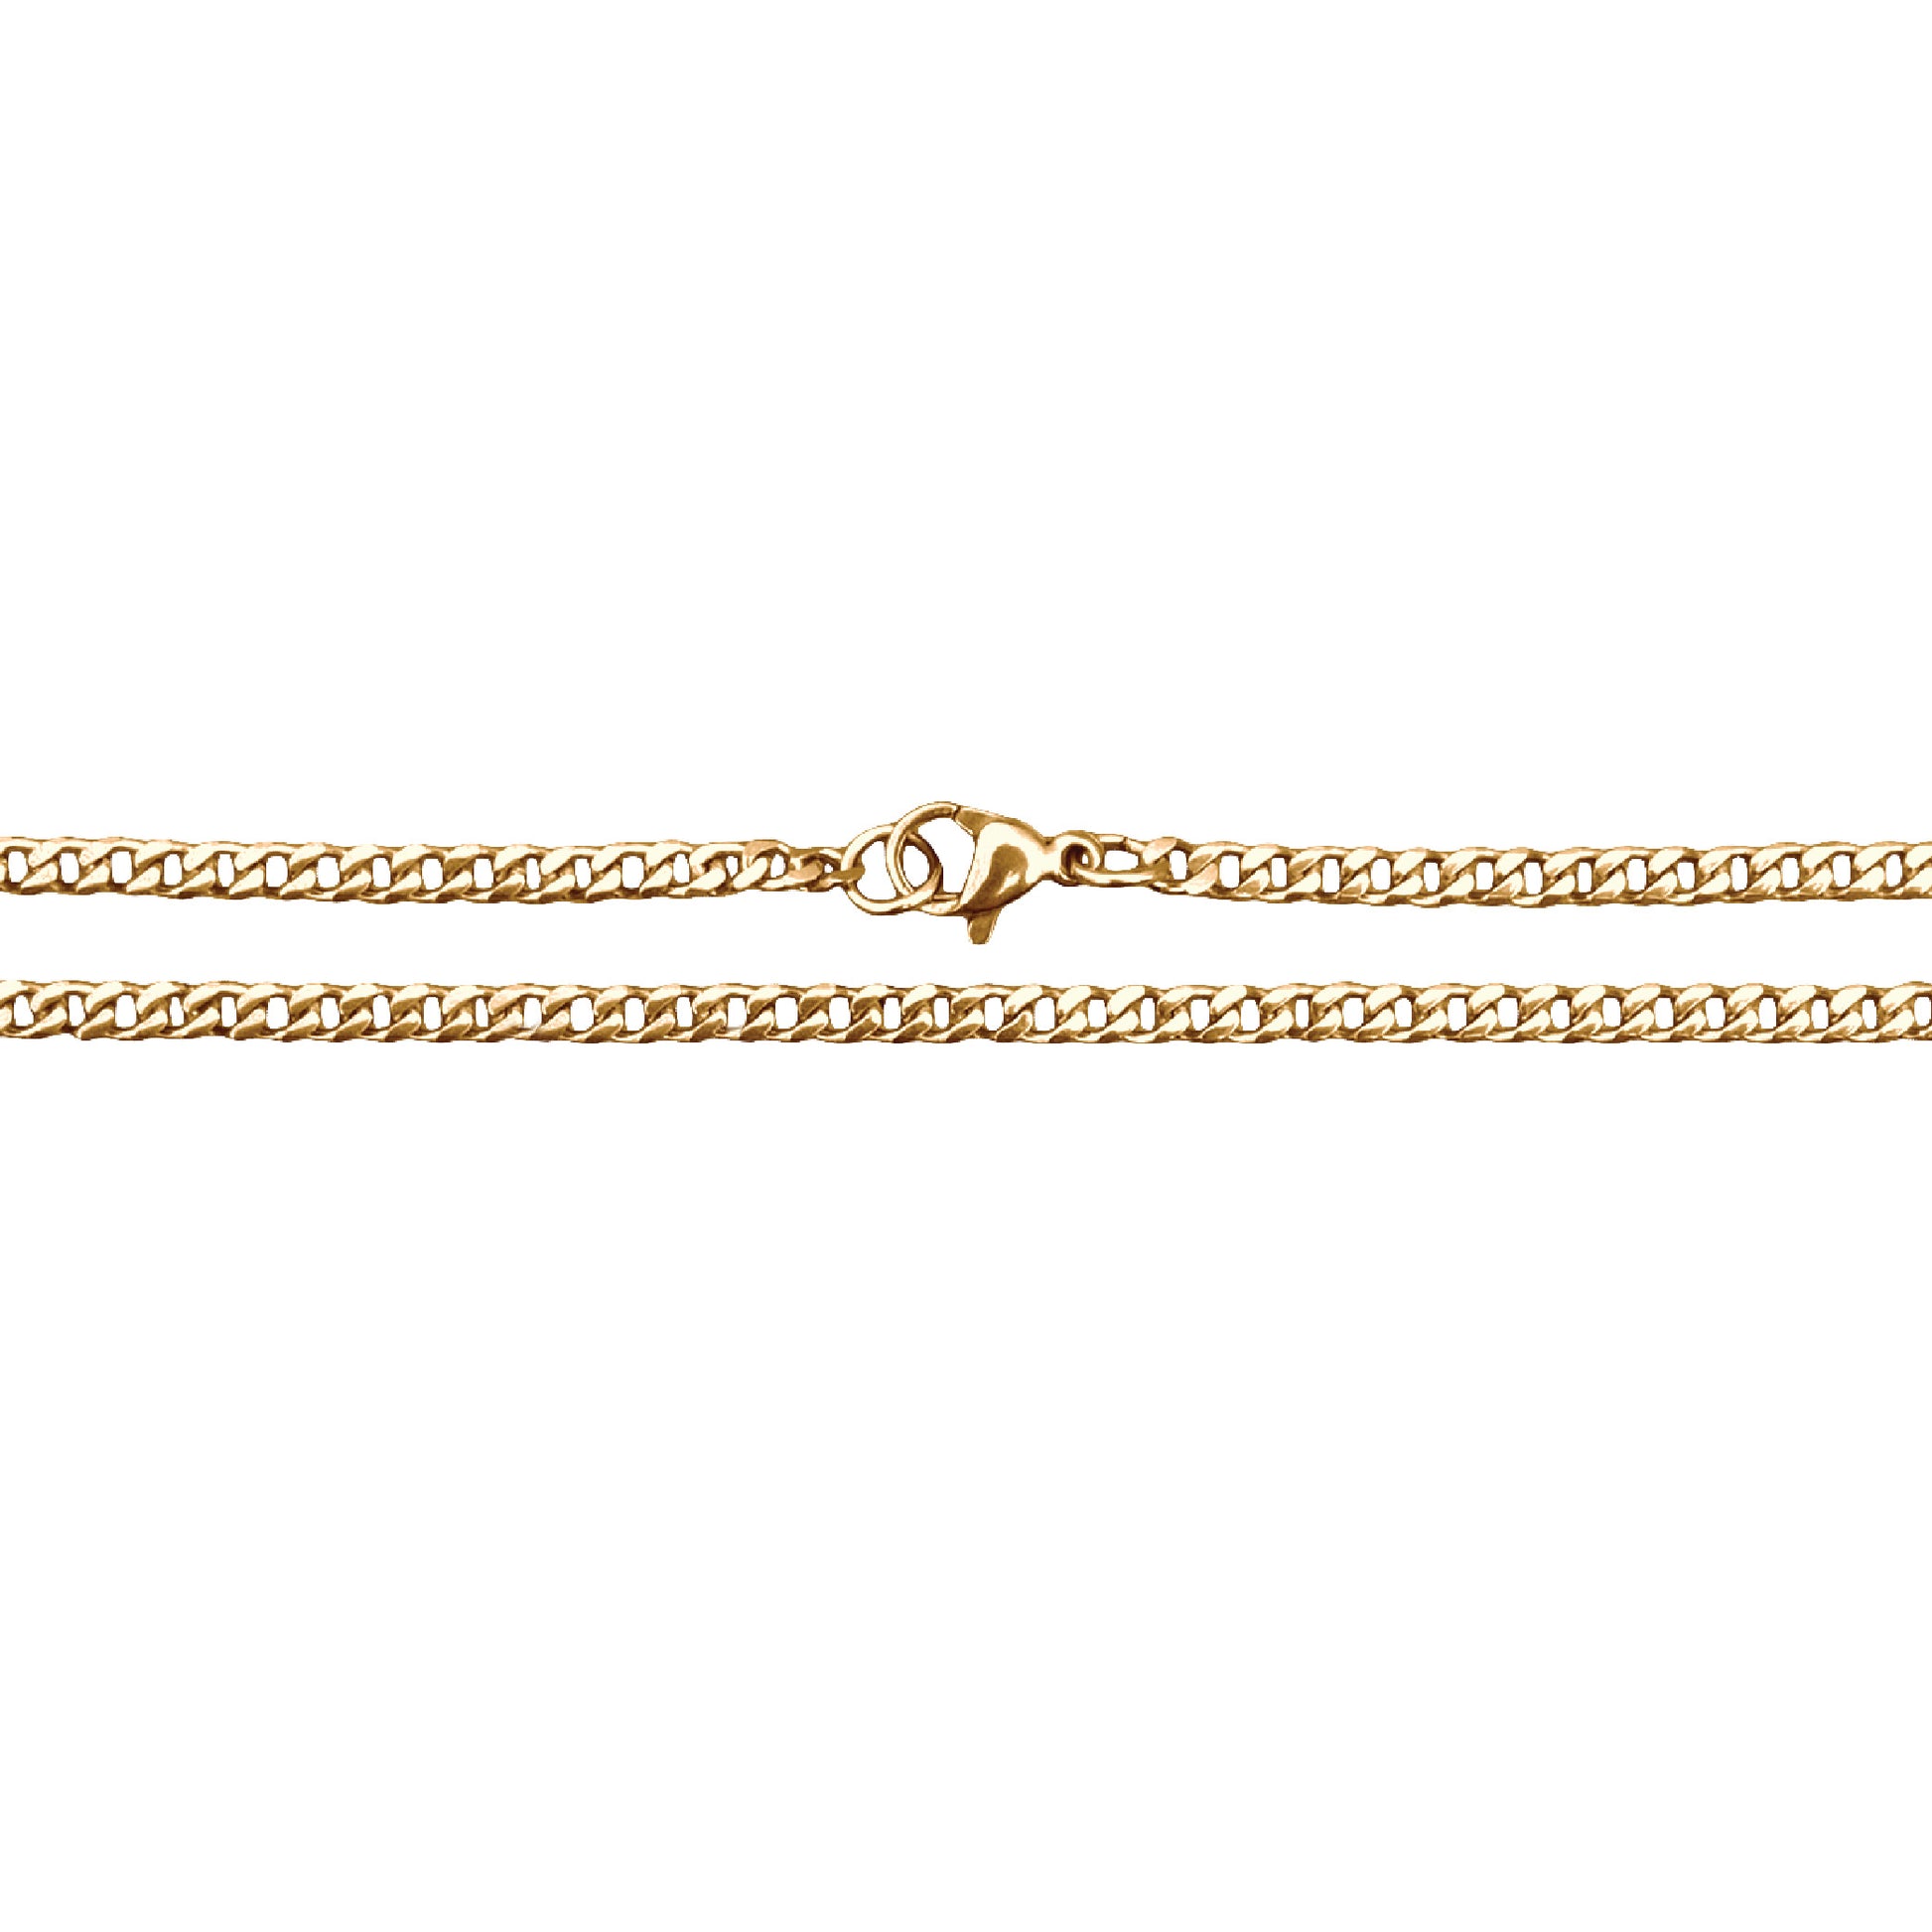 3mm Cuban Link Chain Necklace - 14K Gold Plated Stainless Steel